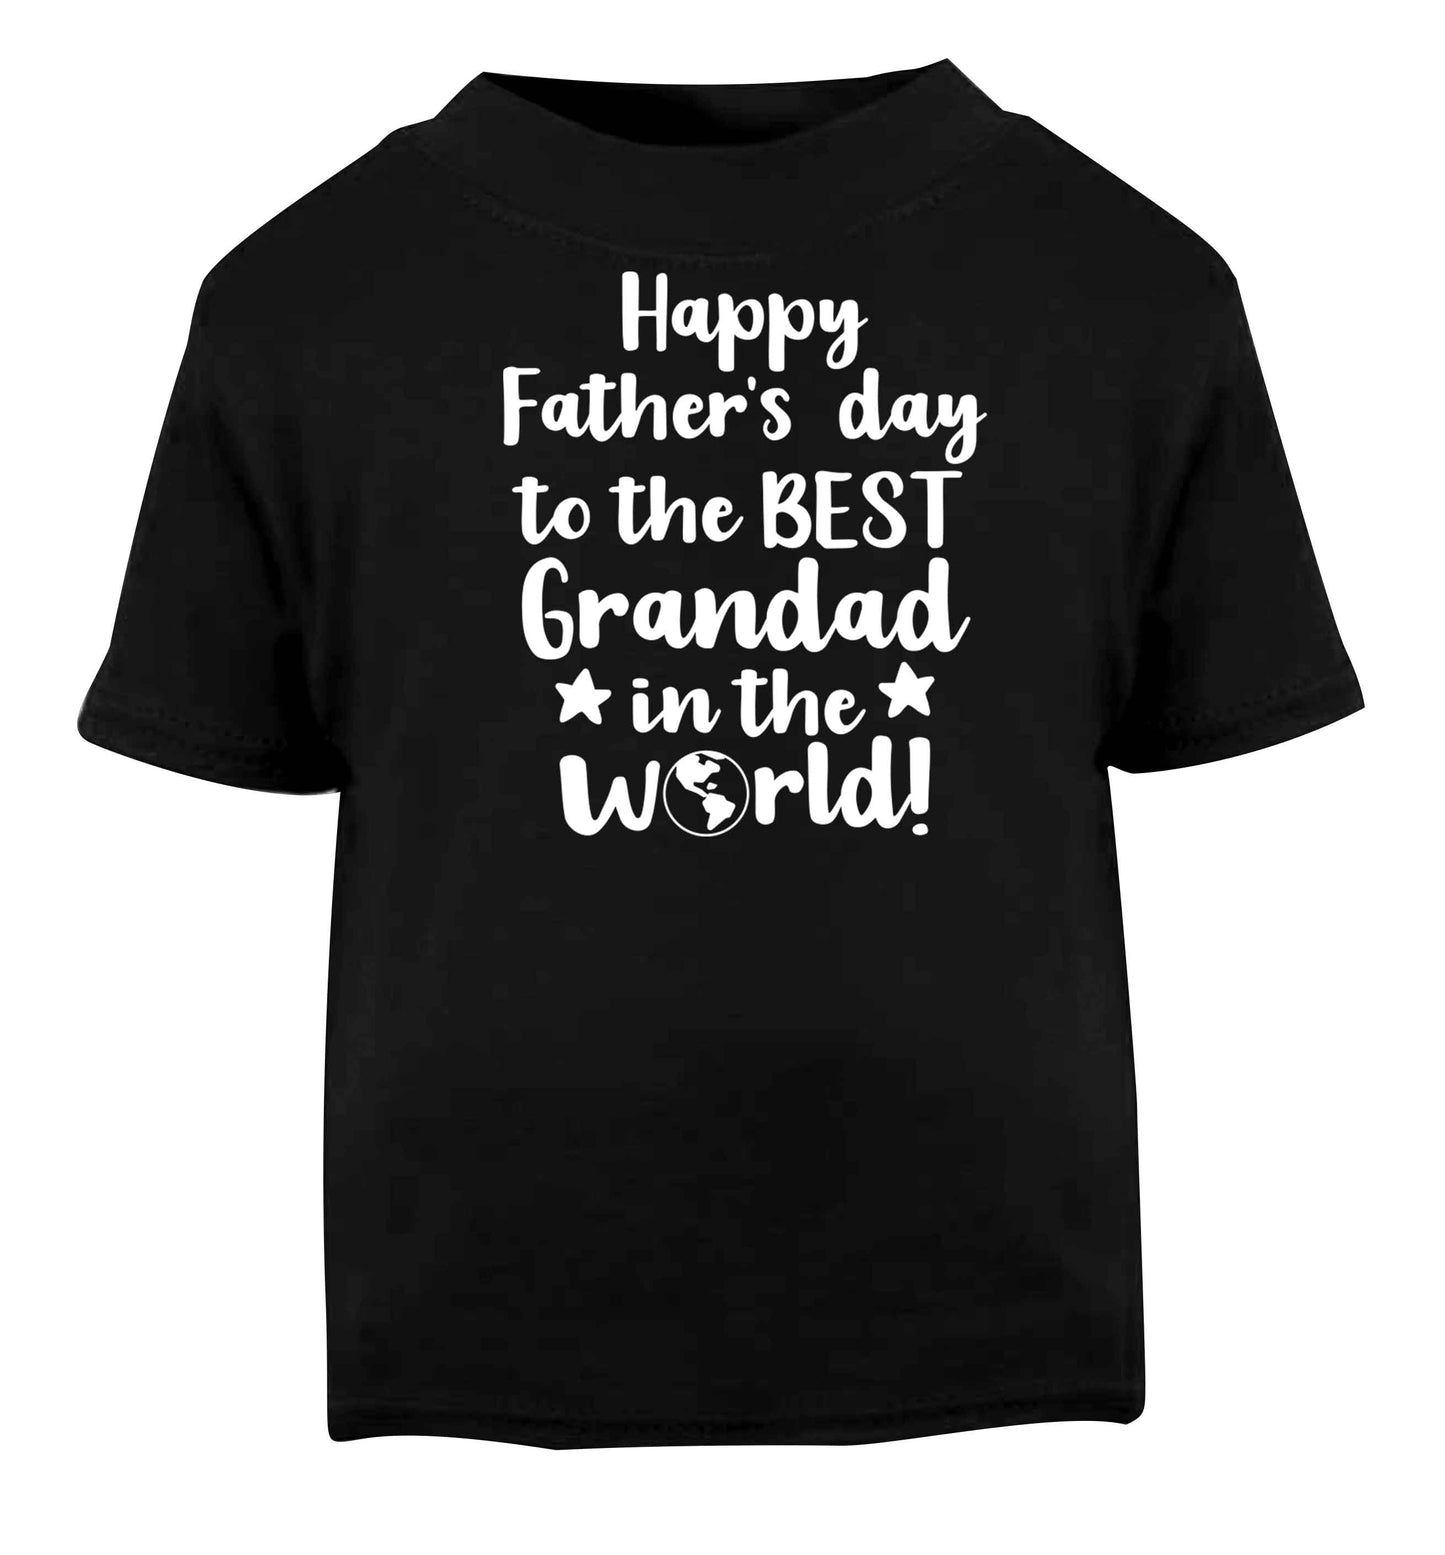 Happy Father's day to the best grandad in the world Black baby toddler Tshirt 2 years